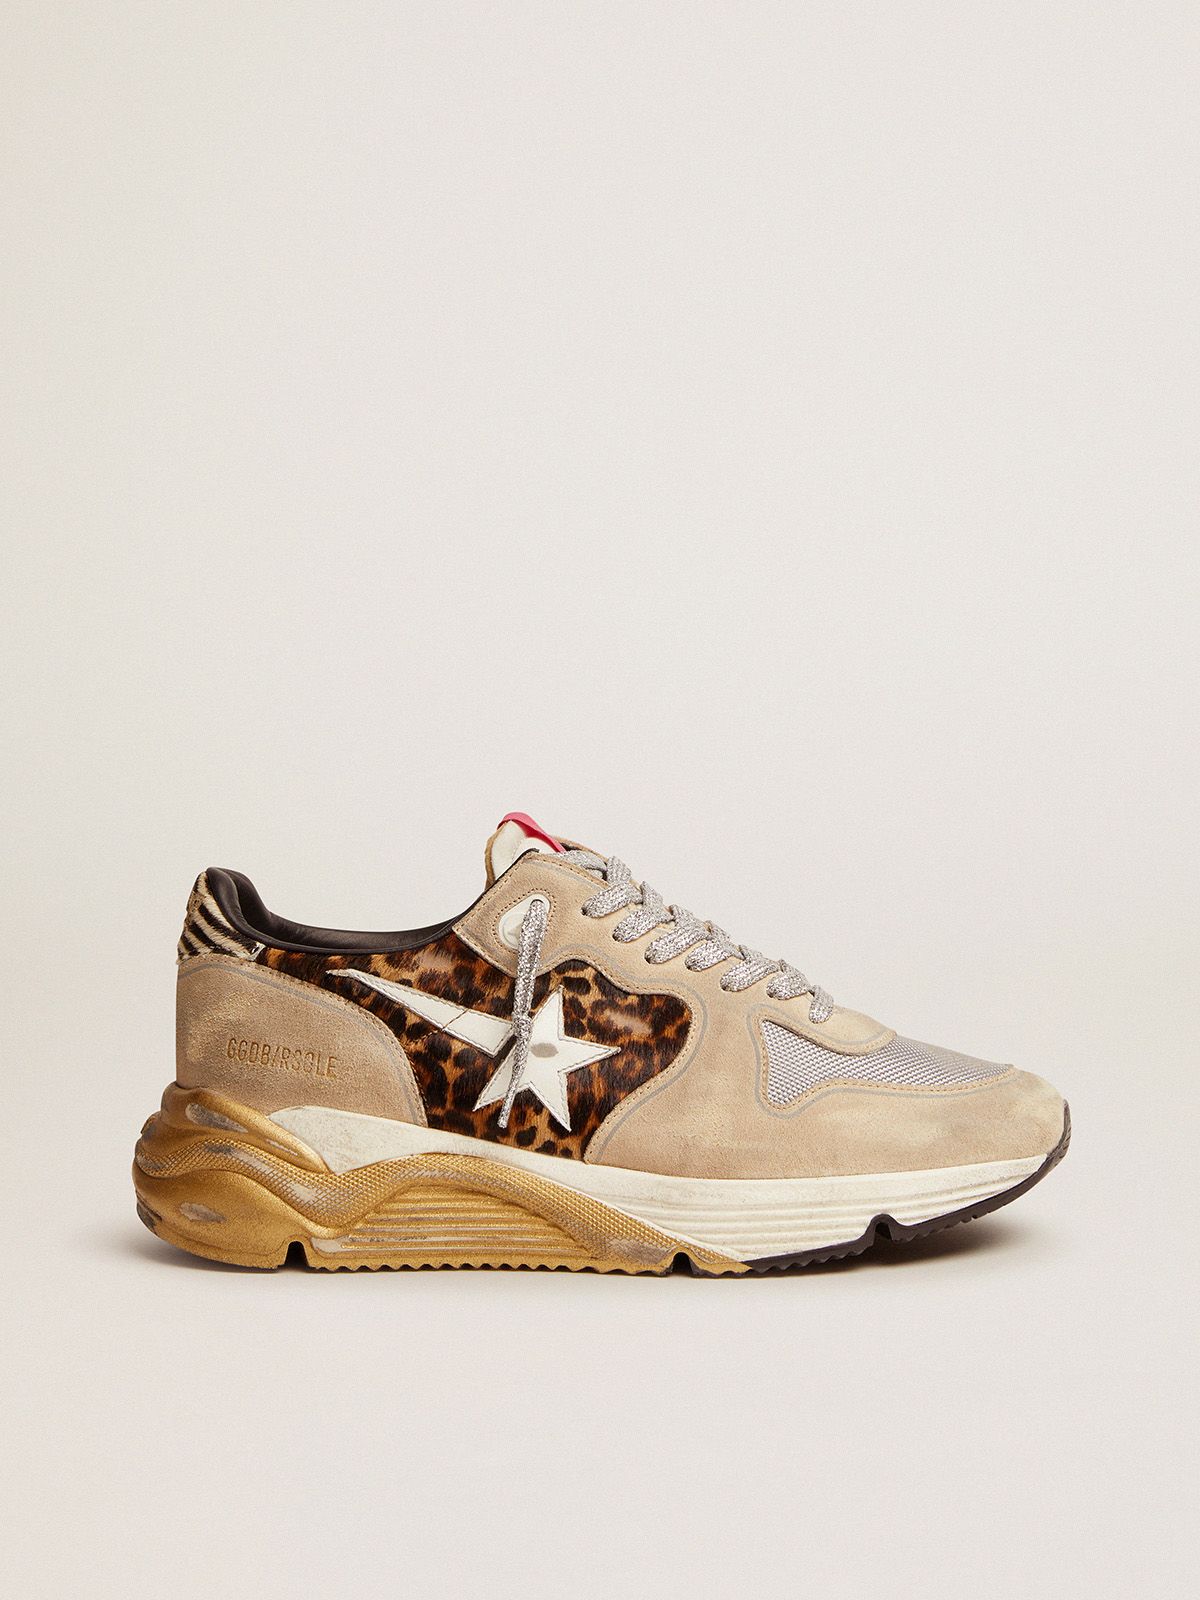 golden goose and skin mesh Sole sneakers in with Running suede insert pony LTD leopard-print